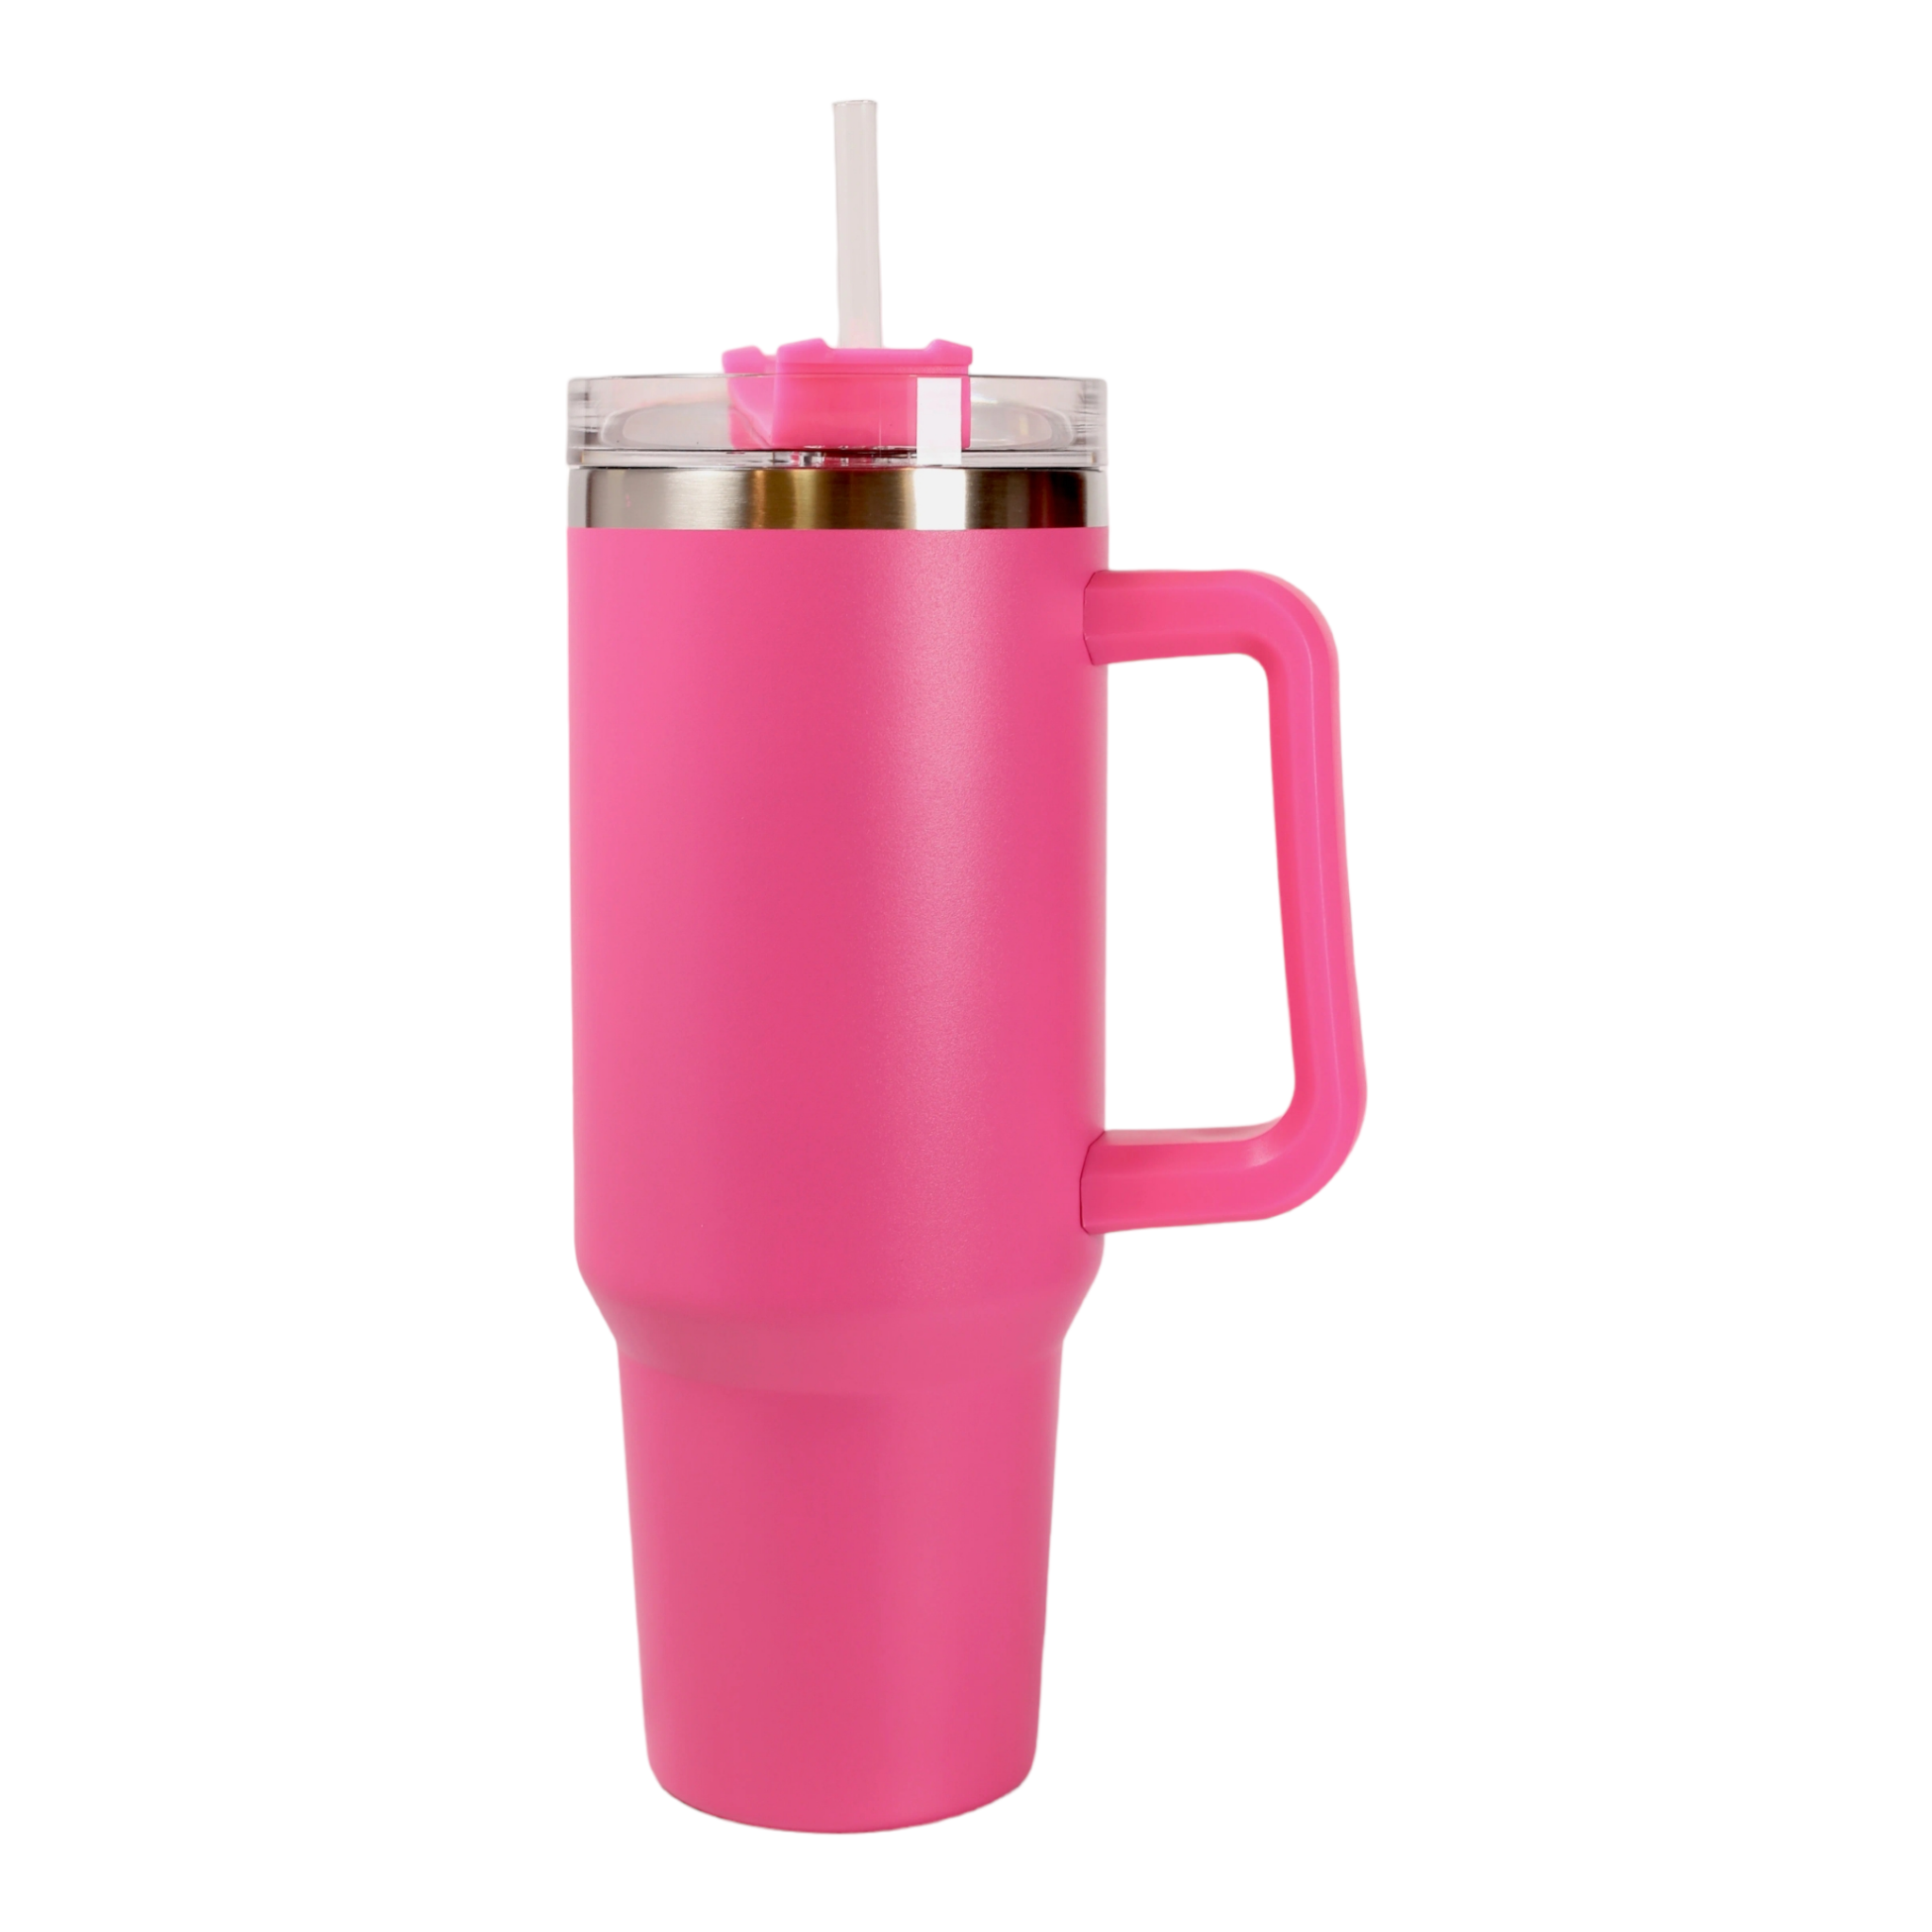 Cup 40 Oz Tumbler Chapstick Keychain Holder - 2 In 1 Holder Fits For Stanley  40 Oz Tumbler Cup